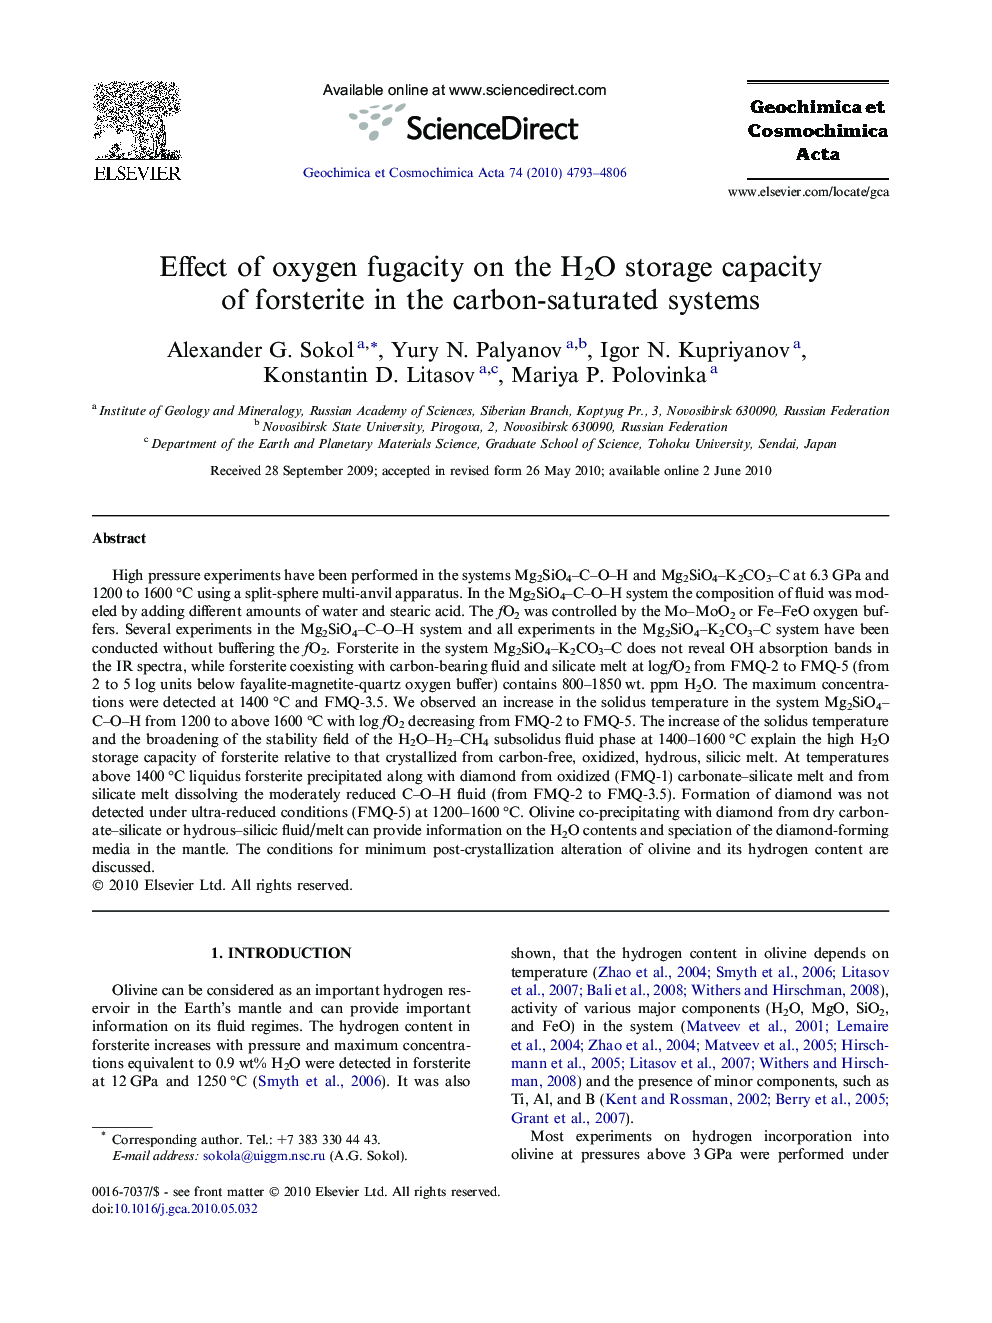 Effect of oxygen fugacity on the H2O storage capacity of forsterite in the carbon-saturated systems